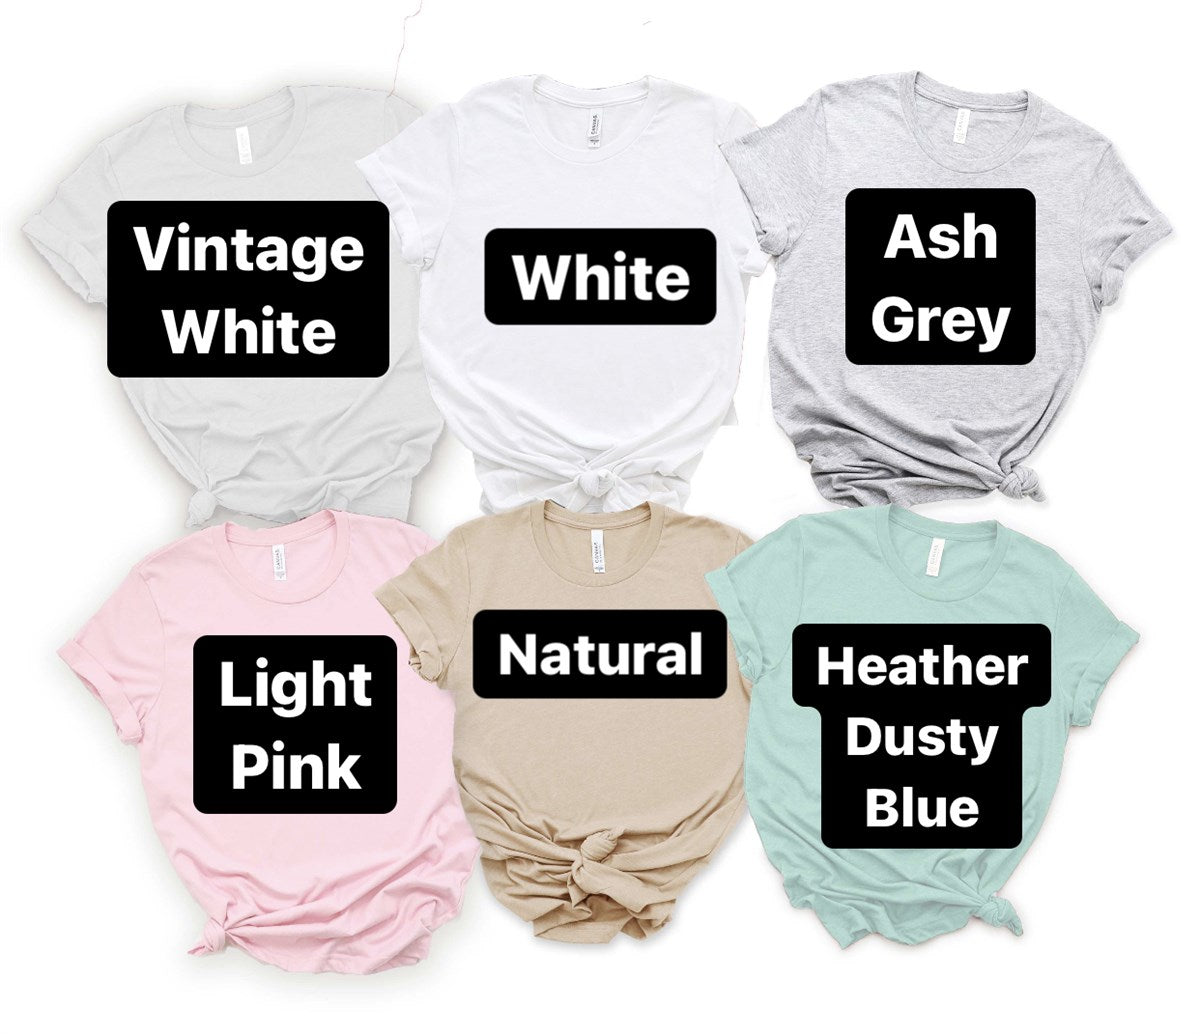 Personalized Mom Tees